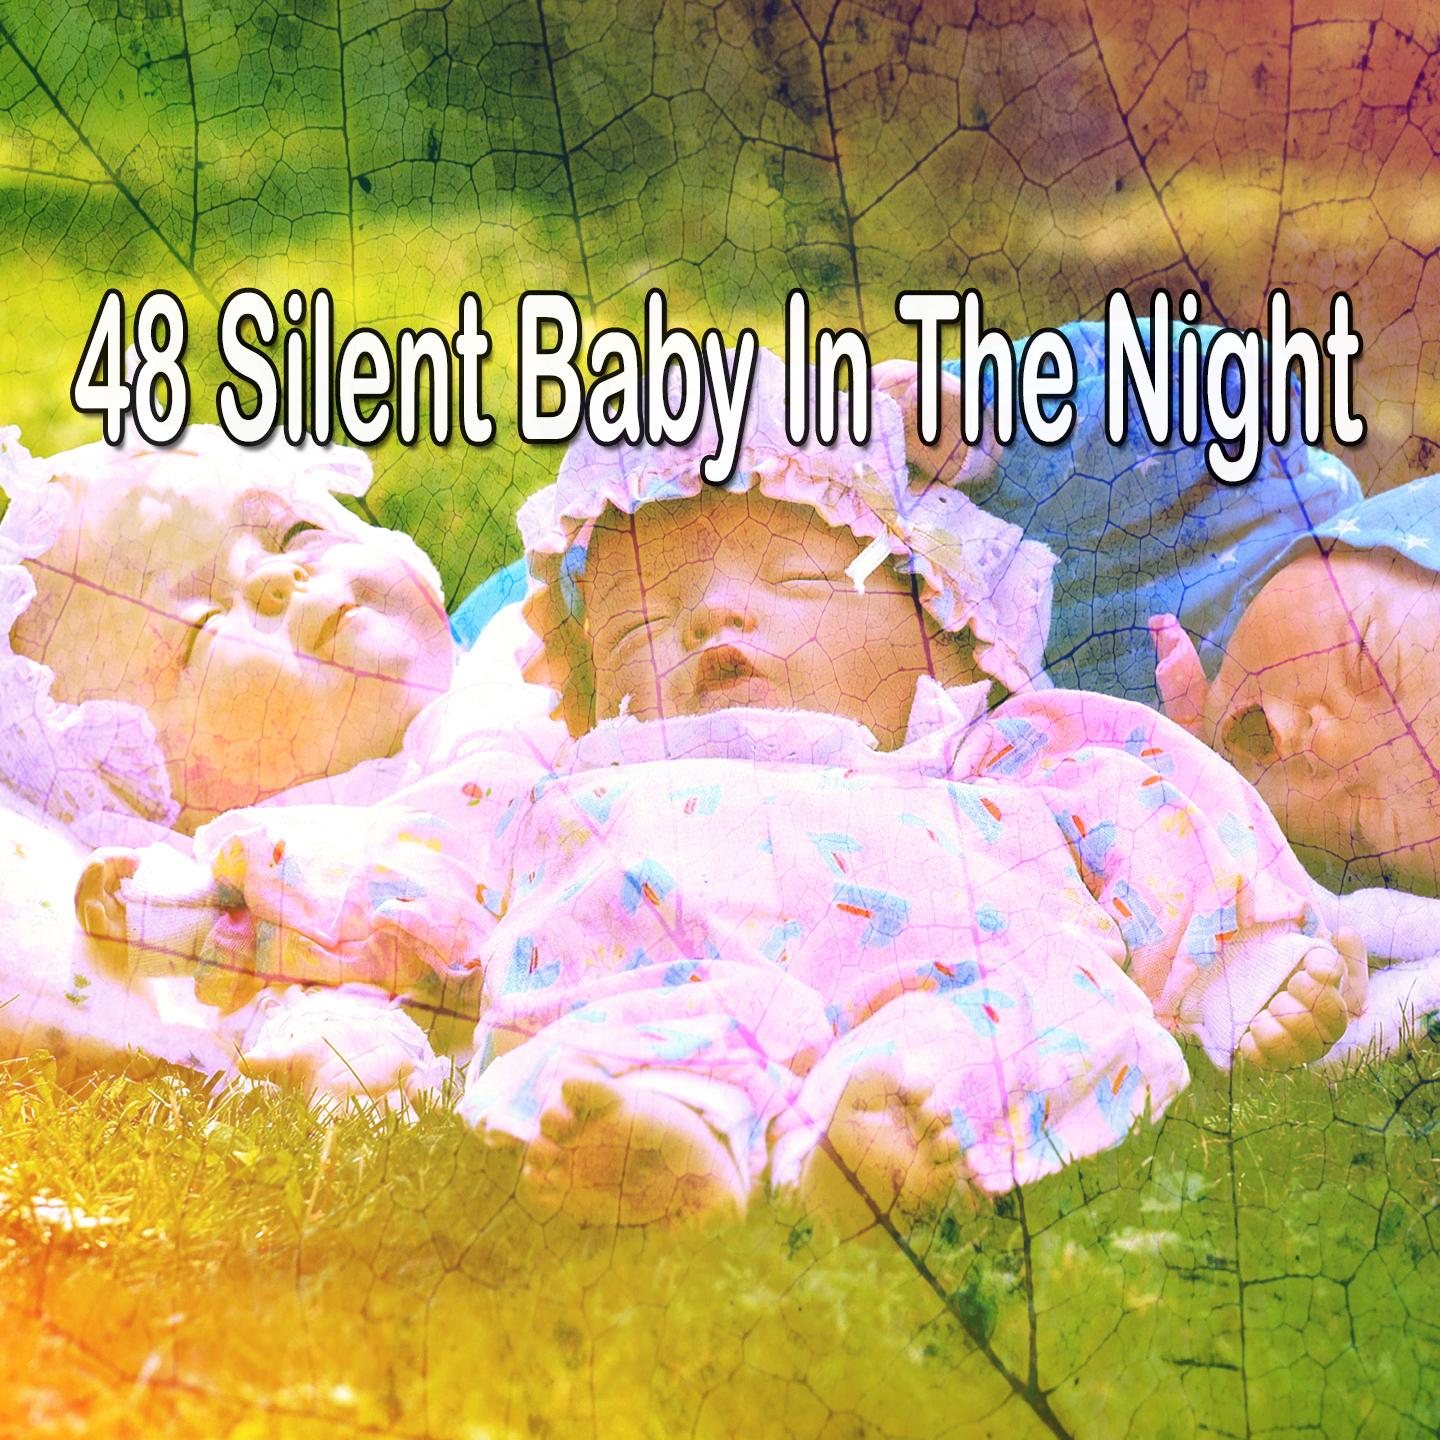 48 Silent Baby in the Night